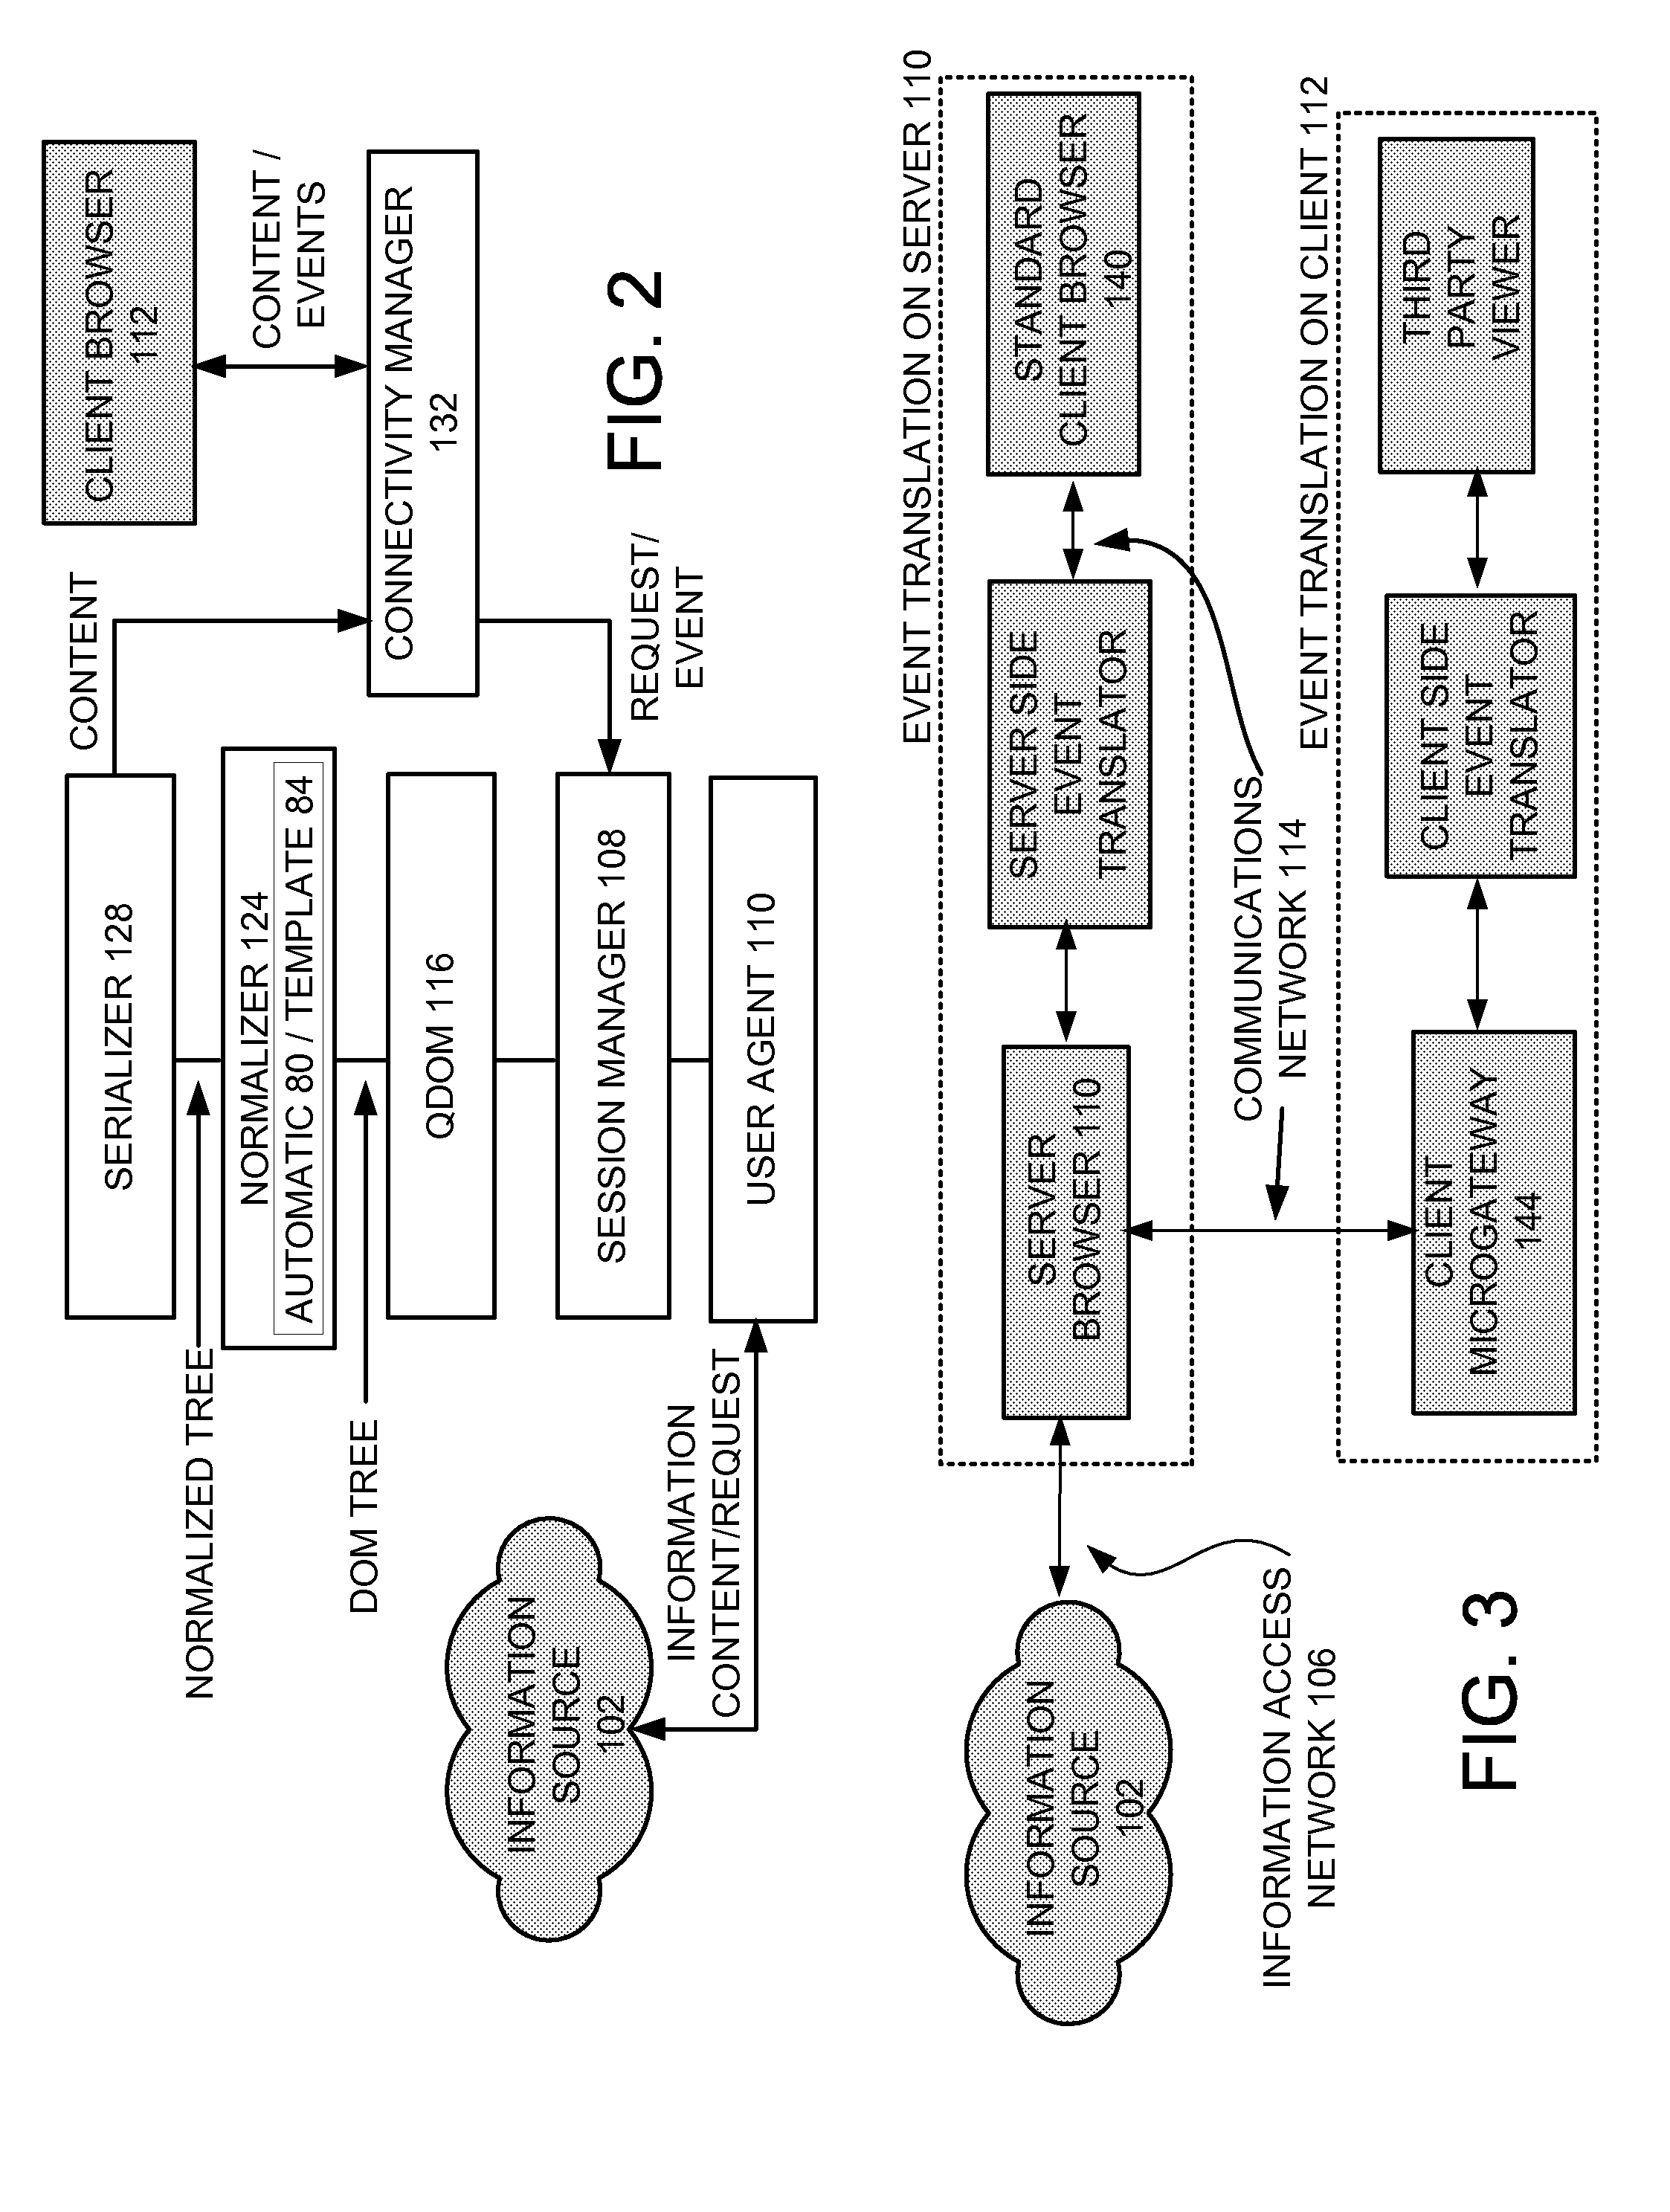 System and Method for Adapting Information Content for an Electronic Device